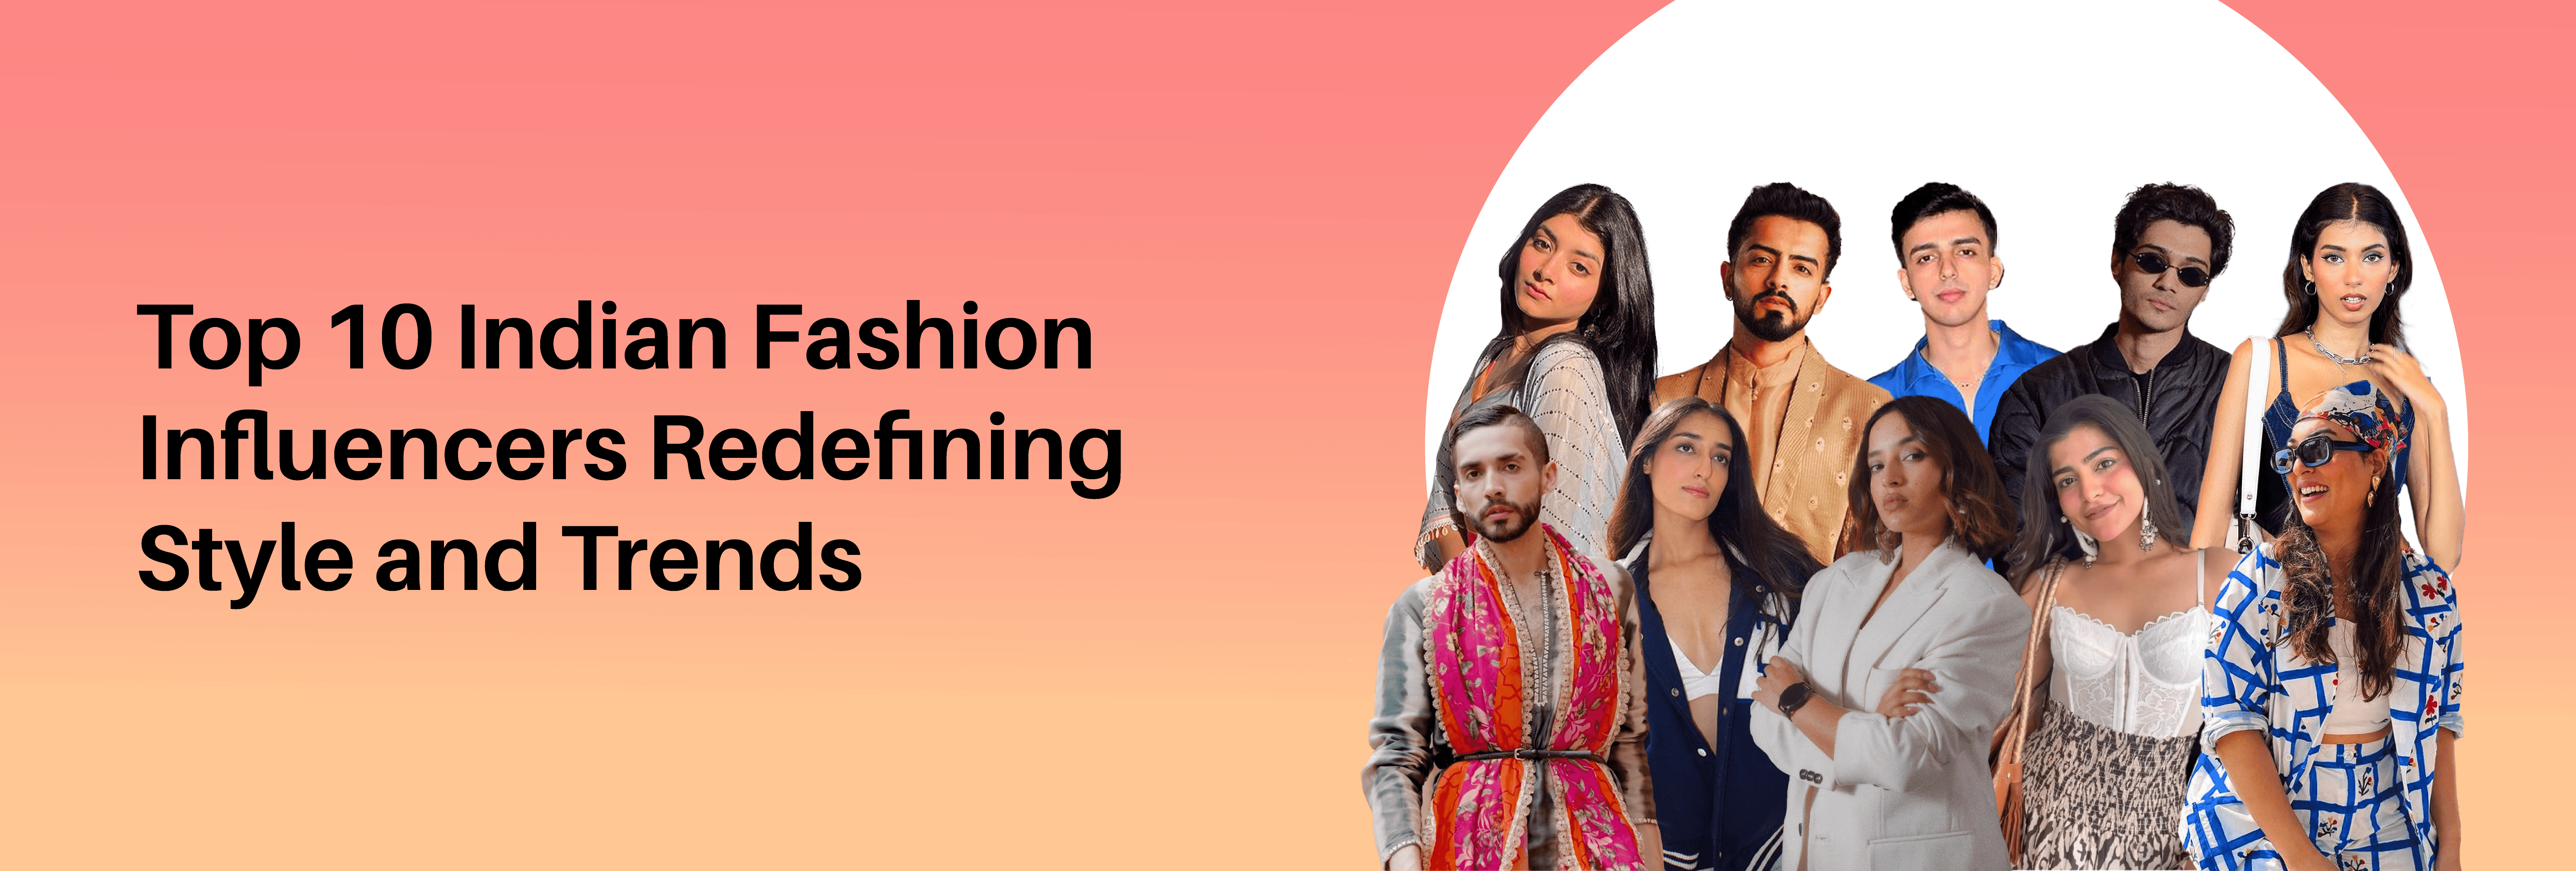 You are currently viewing Top 10 Indian Fashion Influencers Redefining Style and Trends